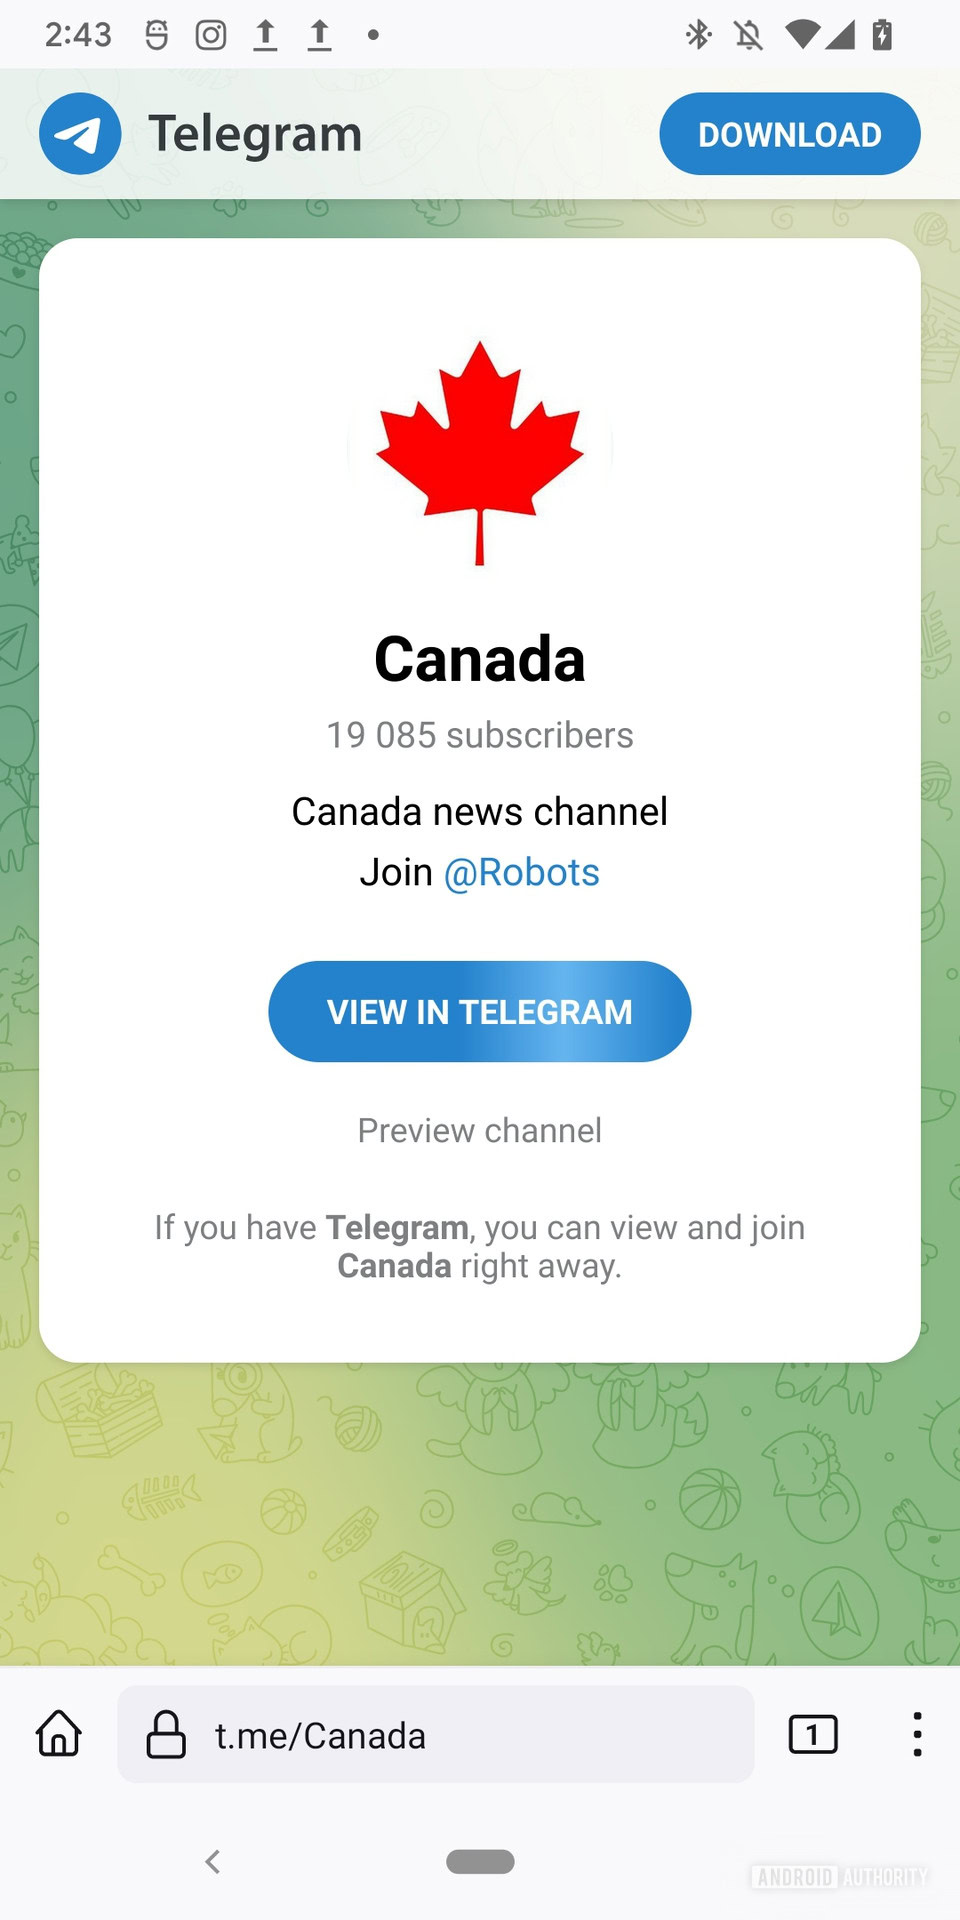 The webpage for 'https://t.me/Canada' showing the groups name of 'Canada' and its logo of the group of a red Canadian maple leaf and a blue button that reads 'View in Telegram'.